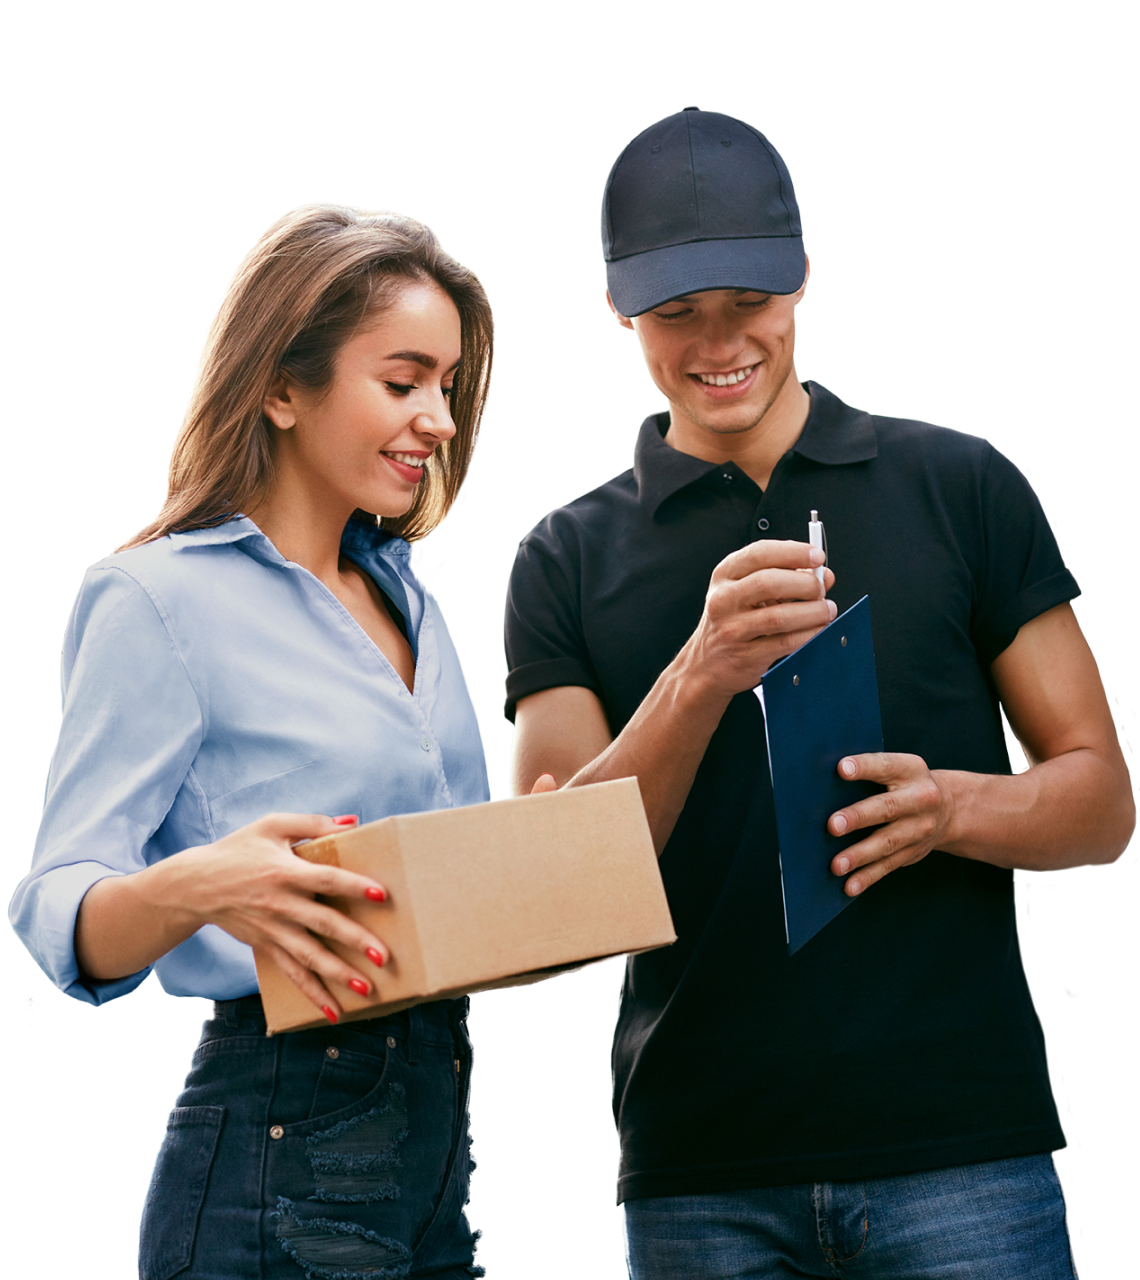 Just Deliveries - The ONLY Service for High-End Invites & Gift Deliveries!  - India News & Updates on EVENTFAQS